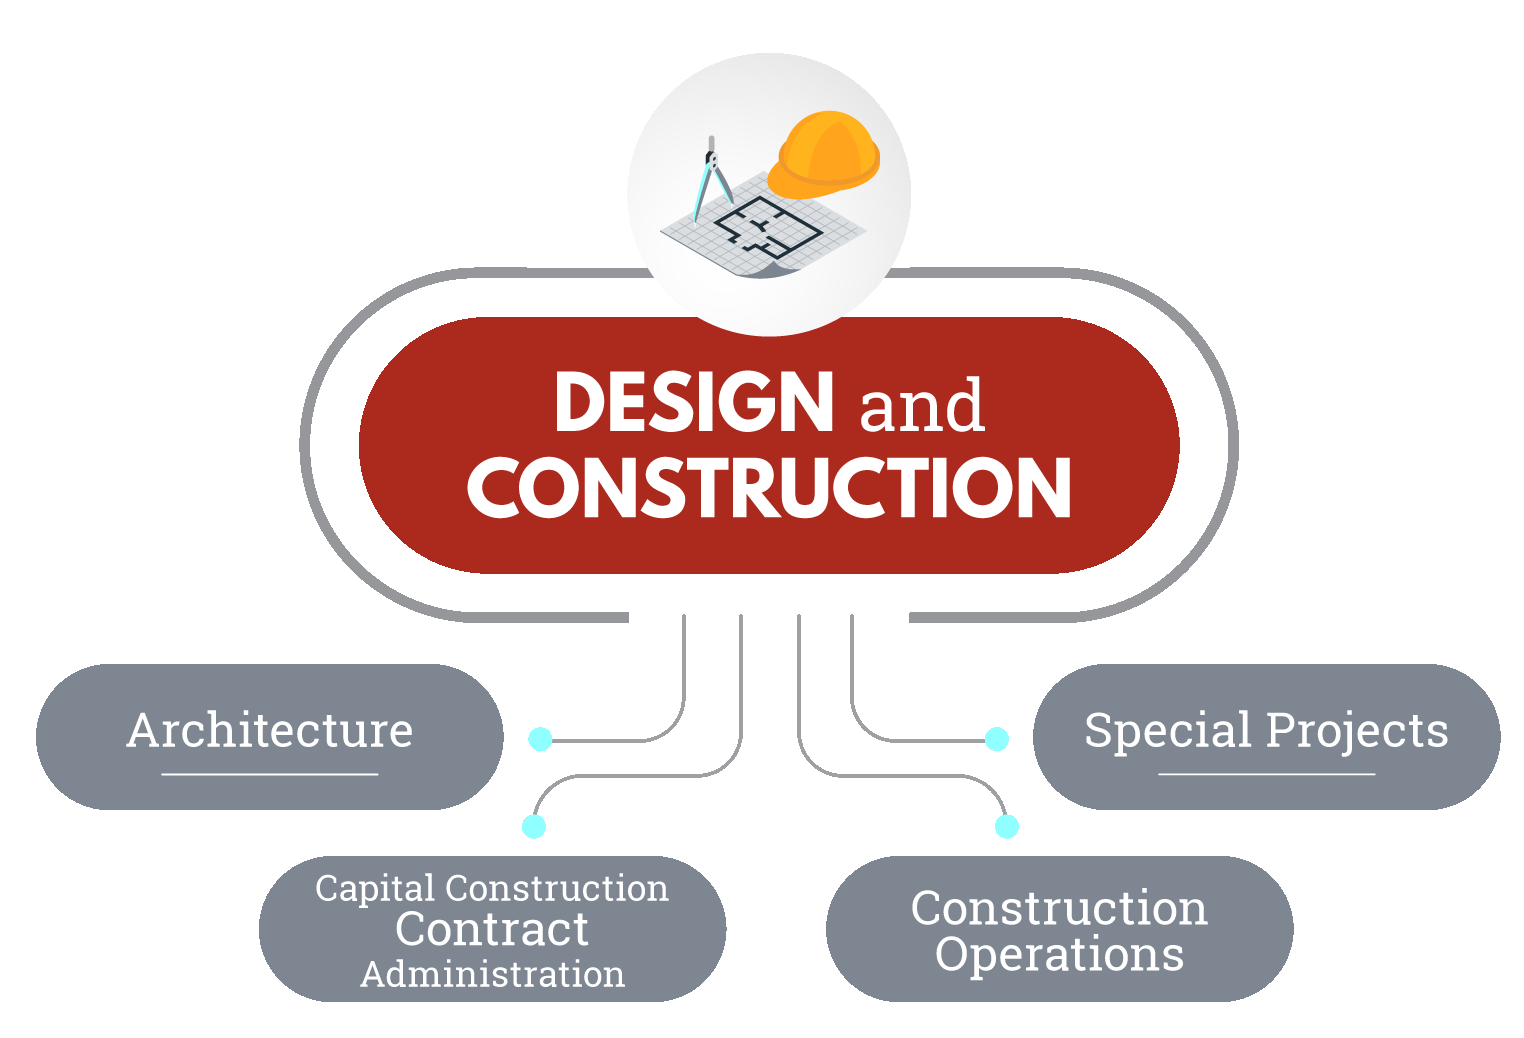 The Division of Design and Construction